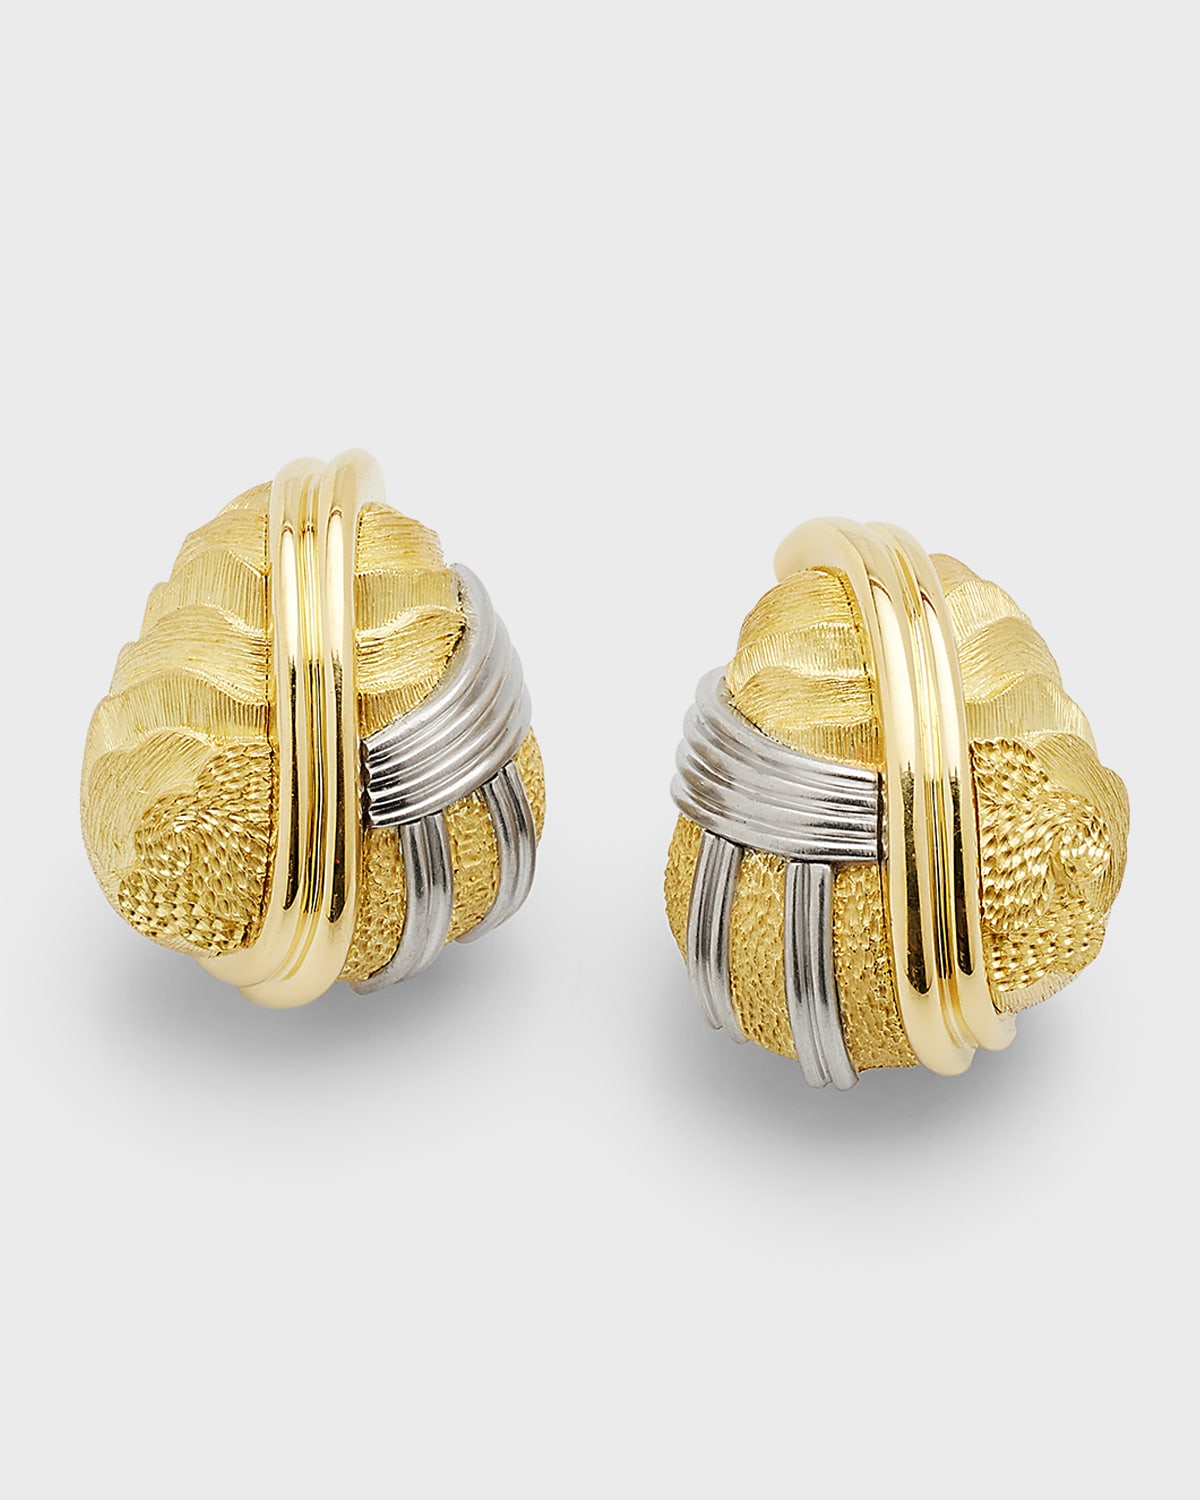 Estate Dunay 18K Yellow Gold and Platinum Earrings